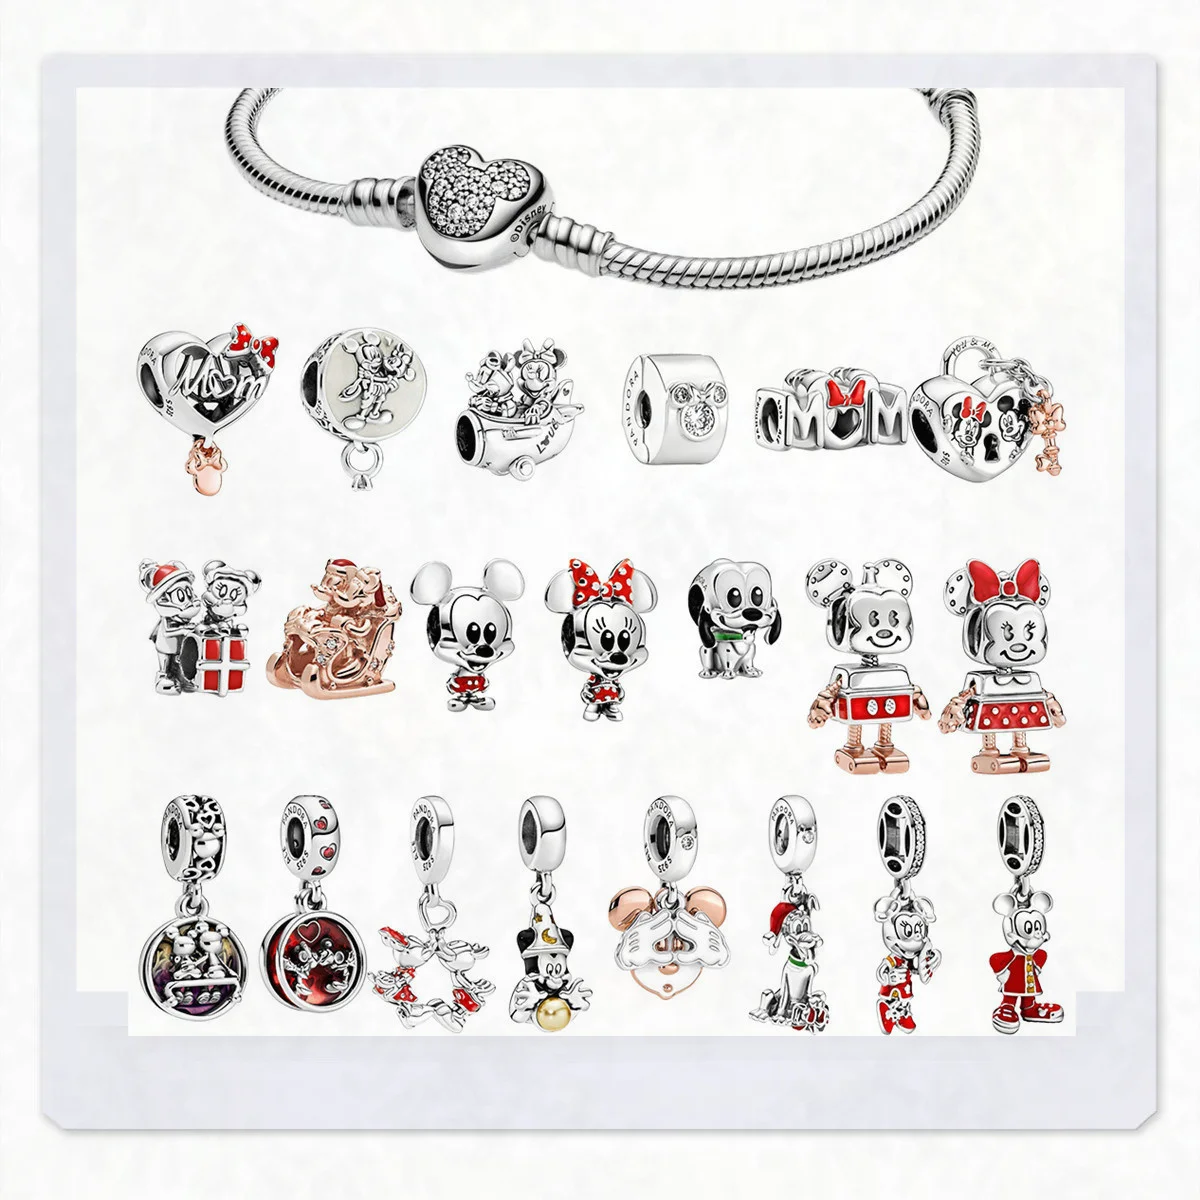 Disney Series Free Shipping 2022 New Arrival Mickey Minnie Mouse Series Jewelry For Pandora Charms Fit Bracelet Beads Kids Gift